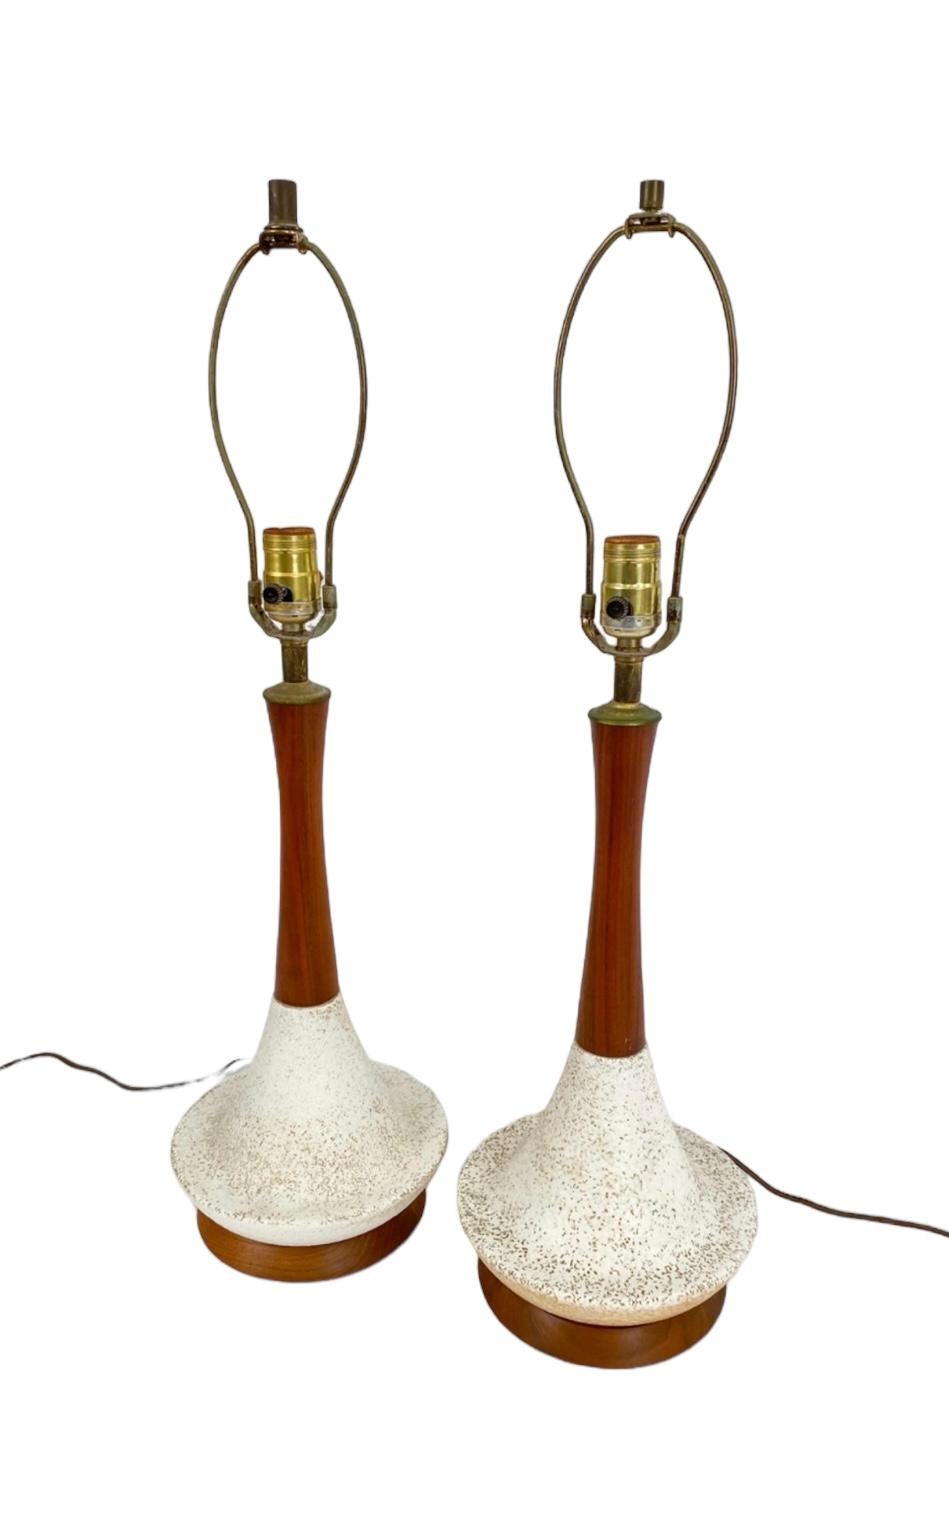 Classic midcentury modern table lamps. Scandinavian style with a combination of elements. Elegant streamlined wooden neck supported by flared speckled ceramic base on wooden disc, accompanied by brass hardware and harp. Wired for US compatibility.